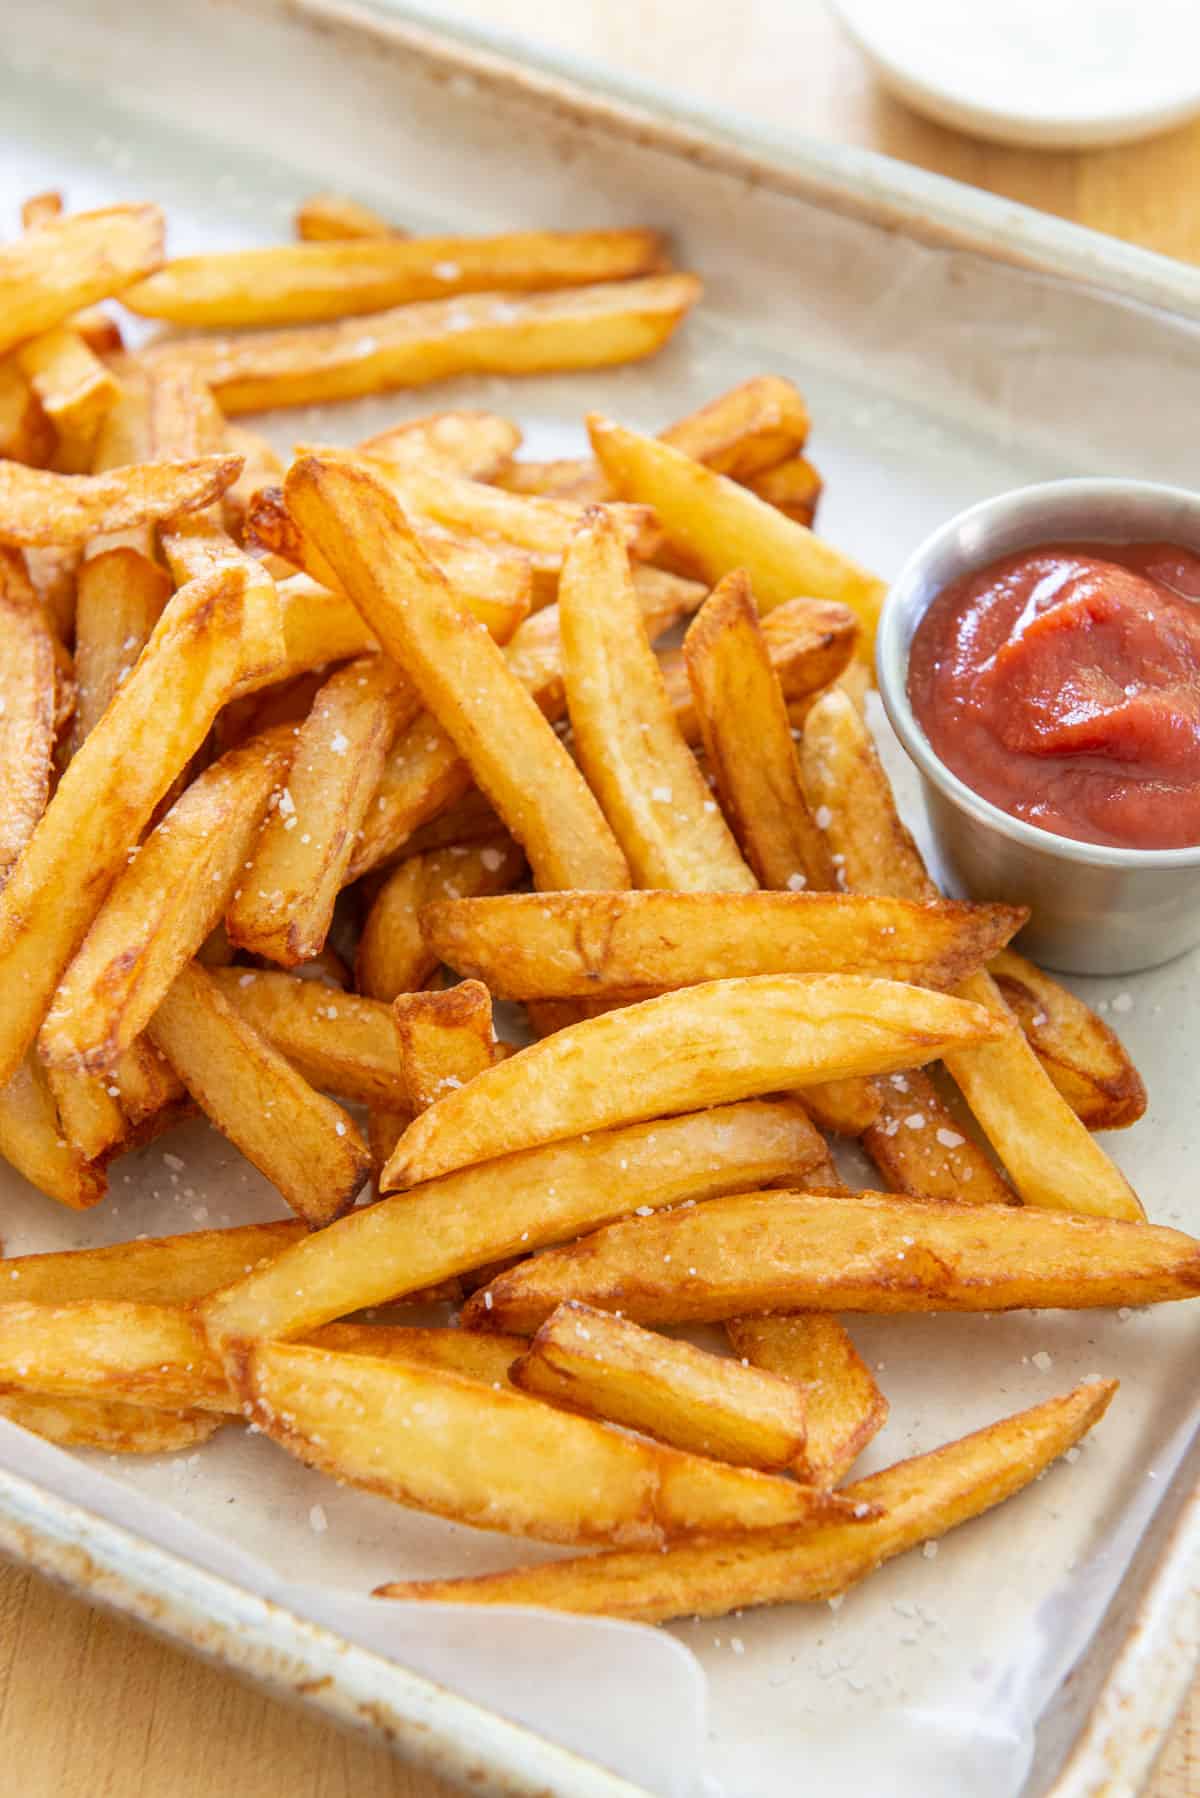 Homemade French Fries On Tray with Ketchup